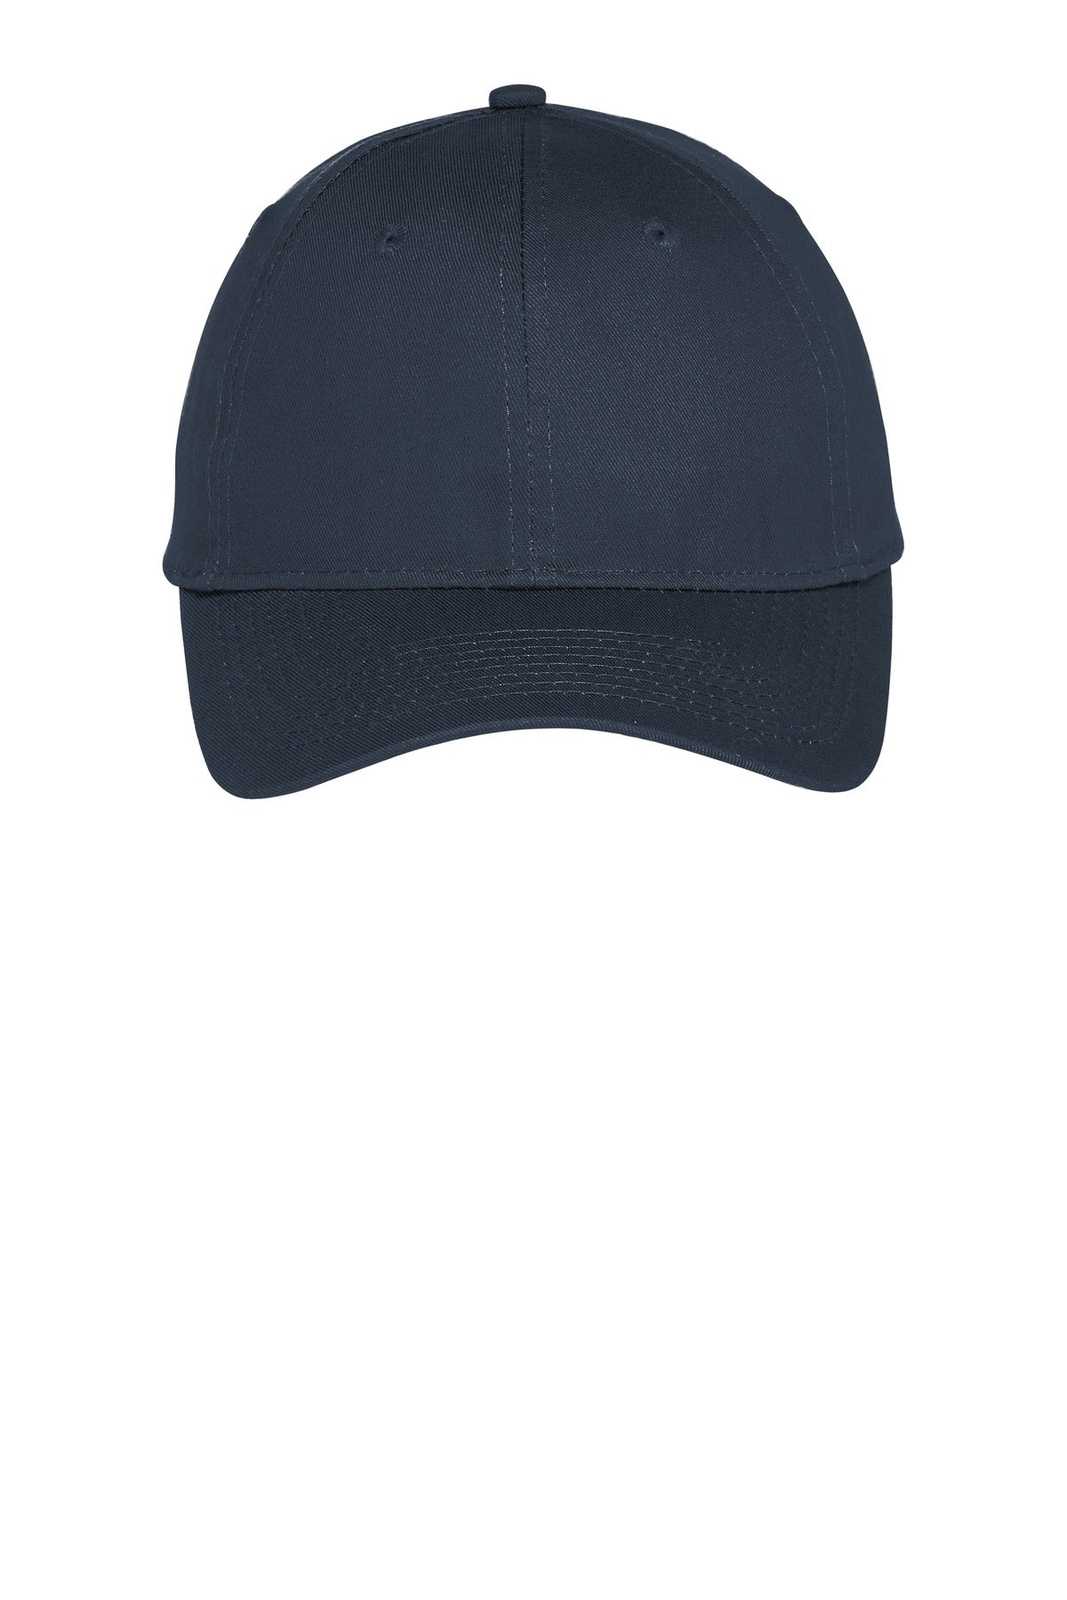 Port & Company C914 Six-Panel Unstructured Twill Cap - True Navy - HIT a Double - 1